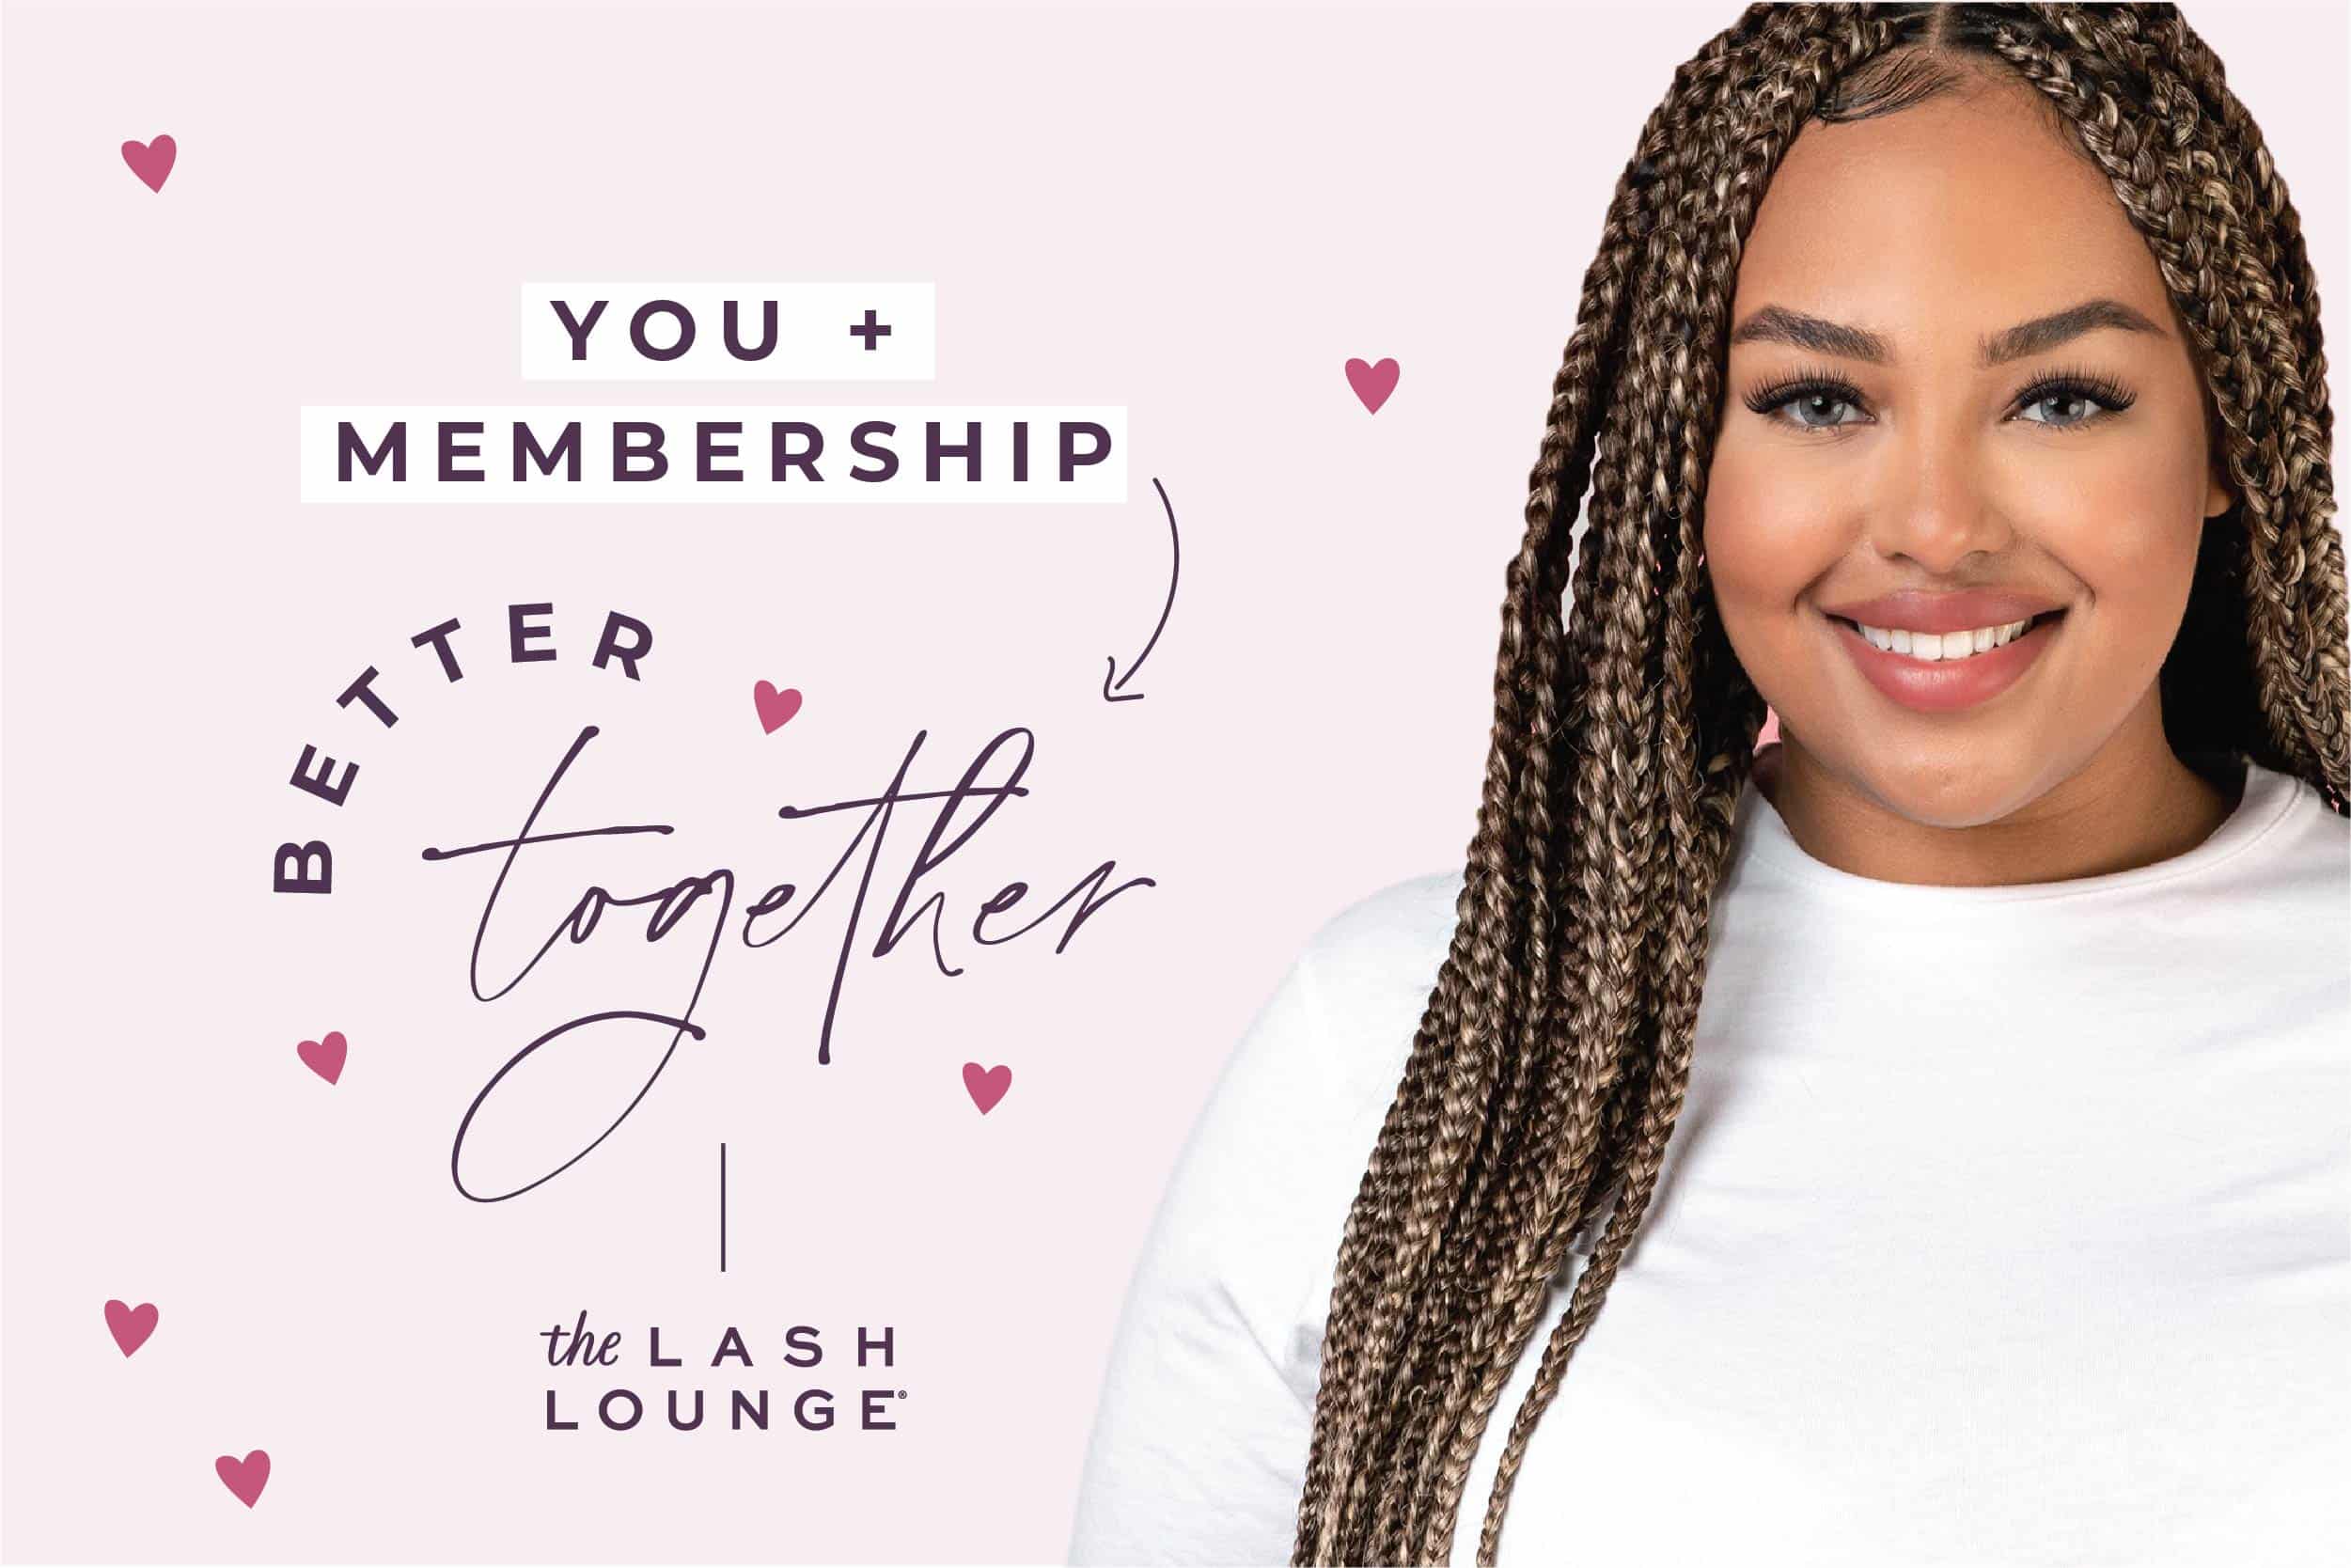 Black woman with braids and lash extensions smiling in a graphic with hearts for Valentine's Day